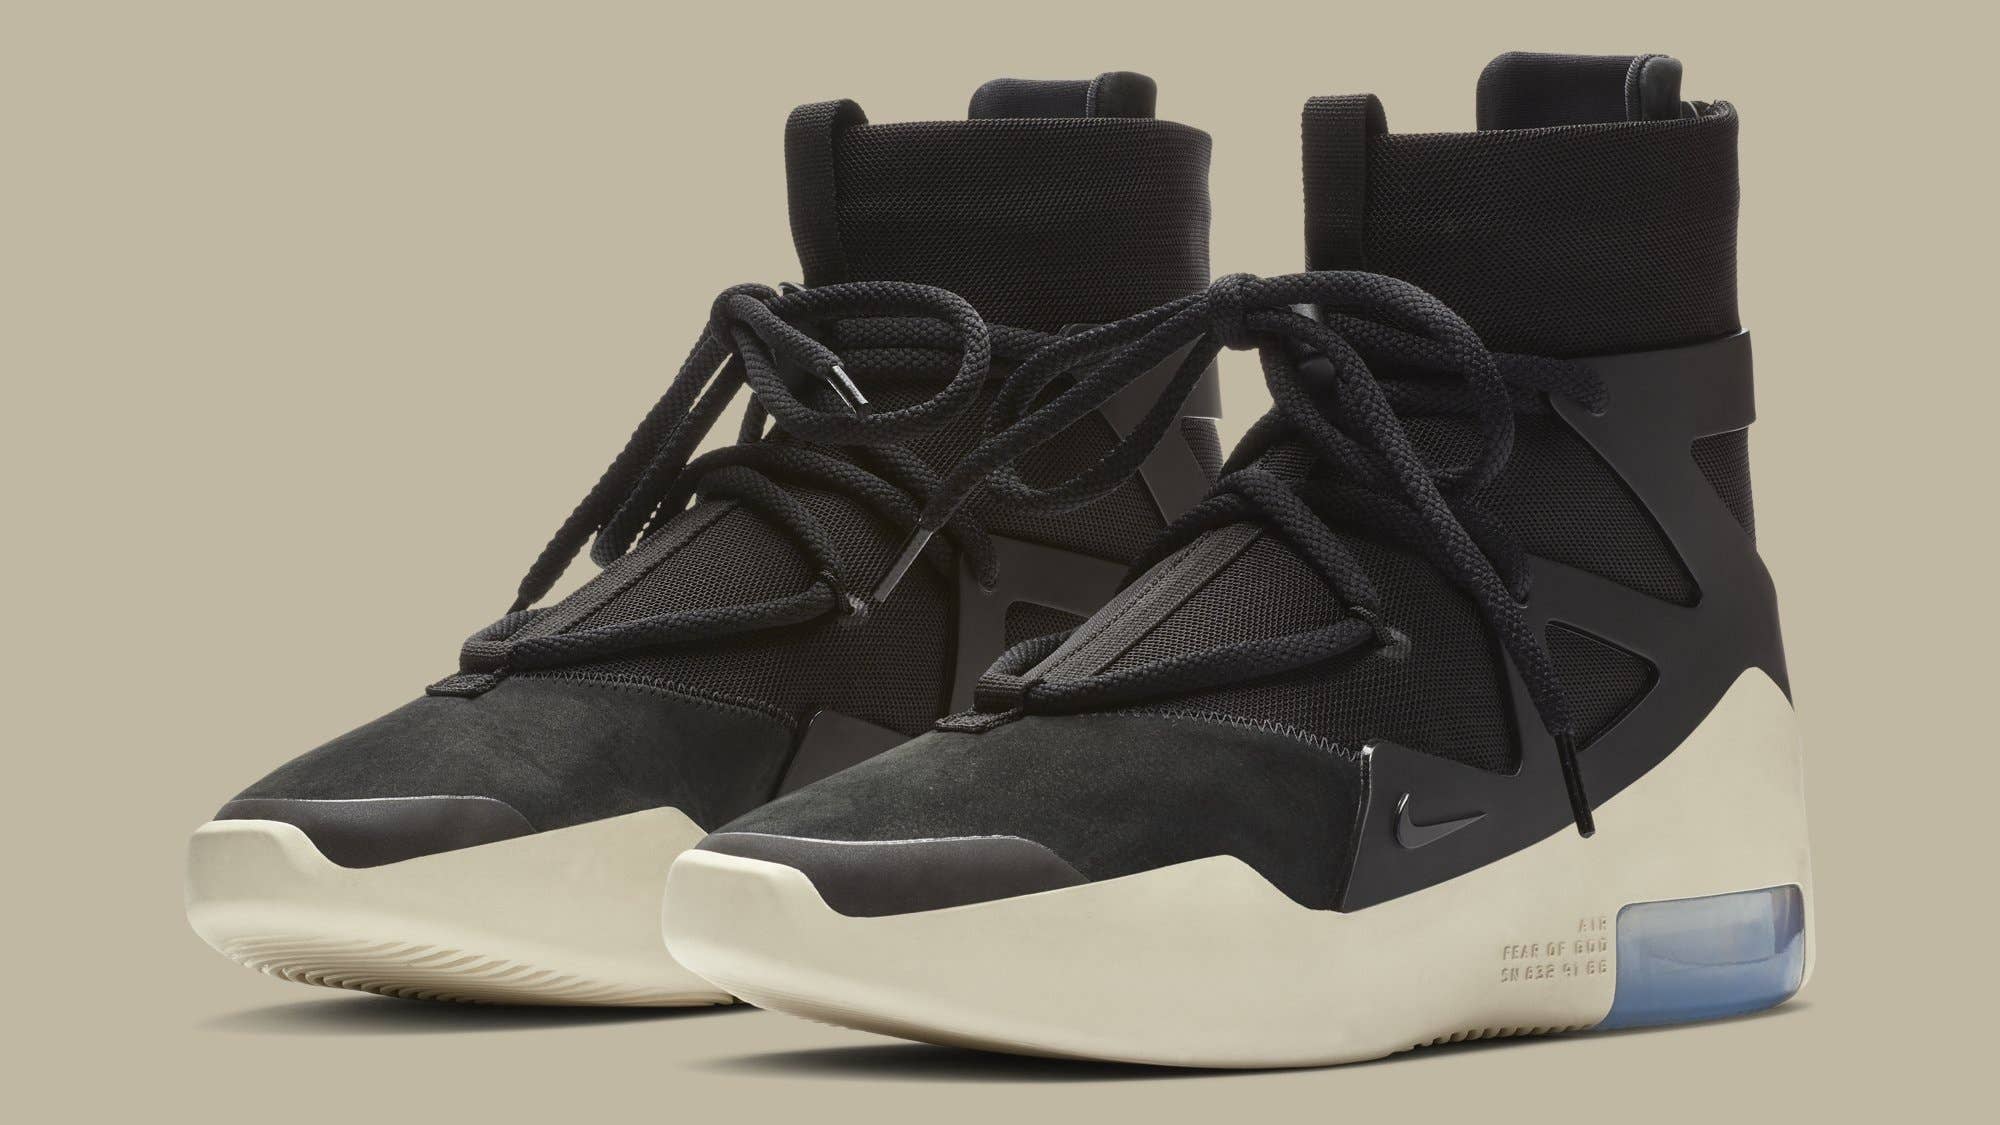 Leopardo Desde Comenzar The Air Fear of God 1 Finally Drops This Weekend | Complex